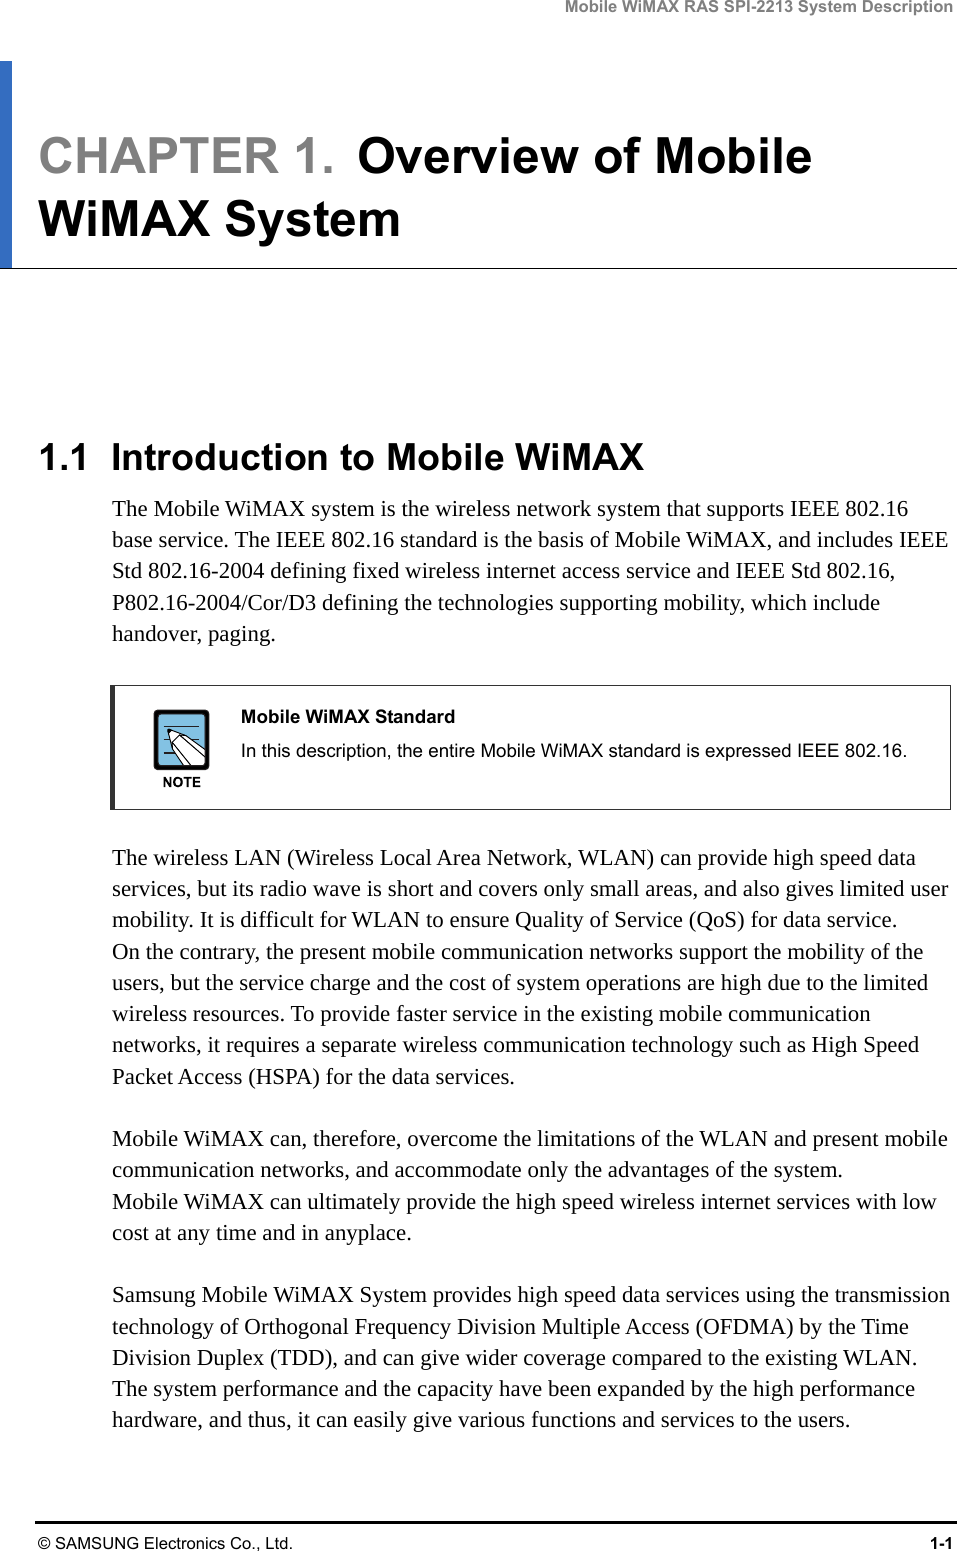 Mobile WiMAX RAS SPI-2213 System Description © SAMSUNG Electronics Co., Ltd.  1-1 CHAPTER 1.  Overview of Mobile WiMAX System      1.1  Introduction to Mobile WiMAX The Mobile WiMAX system is the wireless network system that supports IEEE 802.16 base service. The IEEE 802.16 standard is the basis of Mobile WiMAX, and includes IEEE Std 802.16-2004 defining fixed wireless internet access service and IEEE Std 802.16, P802.16-2004/Cor/D3 defining the technologies supporting mobility, which include handover, paging.   Mobile WiMAX Standard   In this description, the entire Mobile WiMAX standard is expressed IEEE 802.16.  The wireless LAN (Wireless Local Area Network, WLAN) can provide high speed data services, but its radio wave is short and covers only small areas, and also gives limited user mobility. It is difficult for WLAN to ensure Quality of Service (QoS) for data service.   On the contrary, the present mobile communication networks support the mobility of the users, but the service charge and the cost of system operations are high due to the limited wireless resources. To provide faster service in the existing mobile communication networks, it requires a separate wireless communication technology such as High Speed Packet Access (HSPA) for the data services.  Mobile WiMAX can, therefore, overcome the limitations of the WLAN and present mobile communication networks, and accommodate only the advantages of the system.   Mobile WiMAX can ultimately provide the high speed wireless internet services with low cost at any time and in anyplace.  Samsung Mobile WiMAX System provides high speed data services using the transmission technology of Orthogonal Frequency Division Multiple Access (OFDMA) by the Time Division Duplex (TDD), and can give wider coverage compared to the existing WLAN. The system performance and the capacity have been expanded by the high performance hardware, and thus, it can easily give various functions and services to the users.  